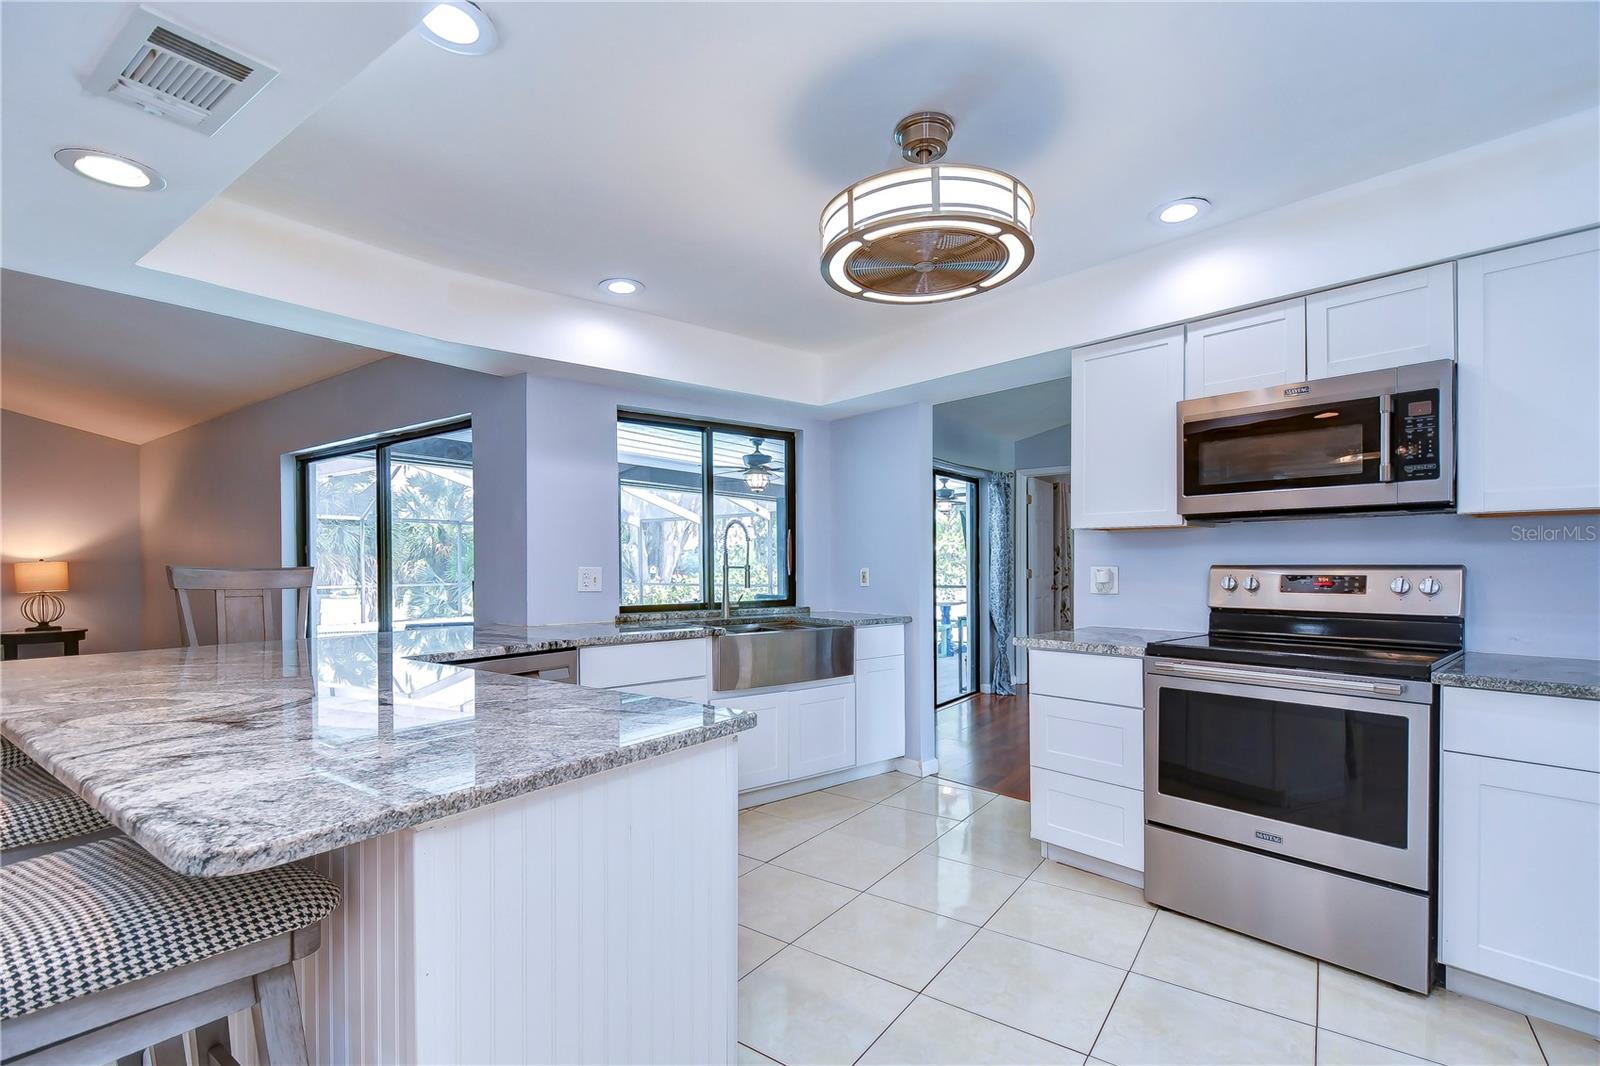 Remodeled kitchen with granite countertops!